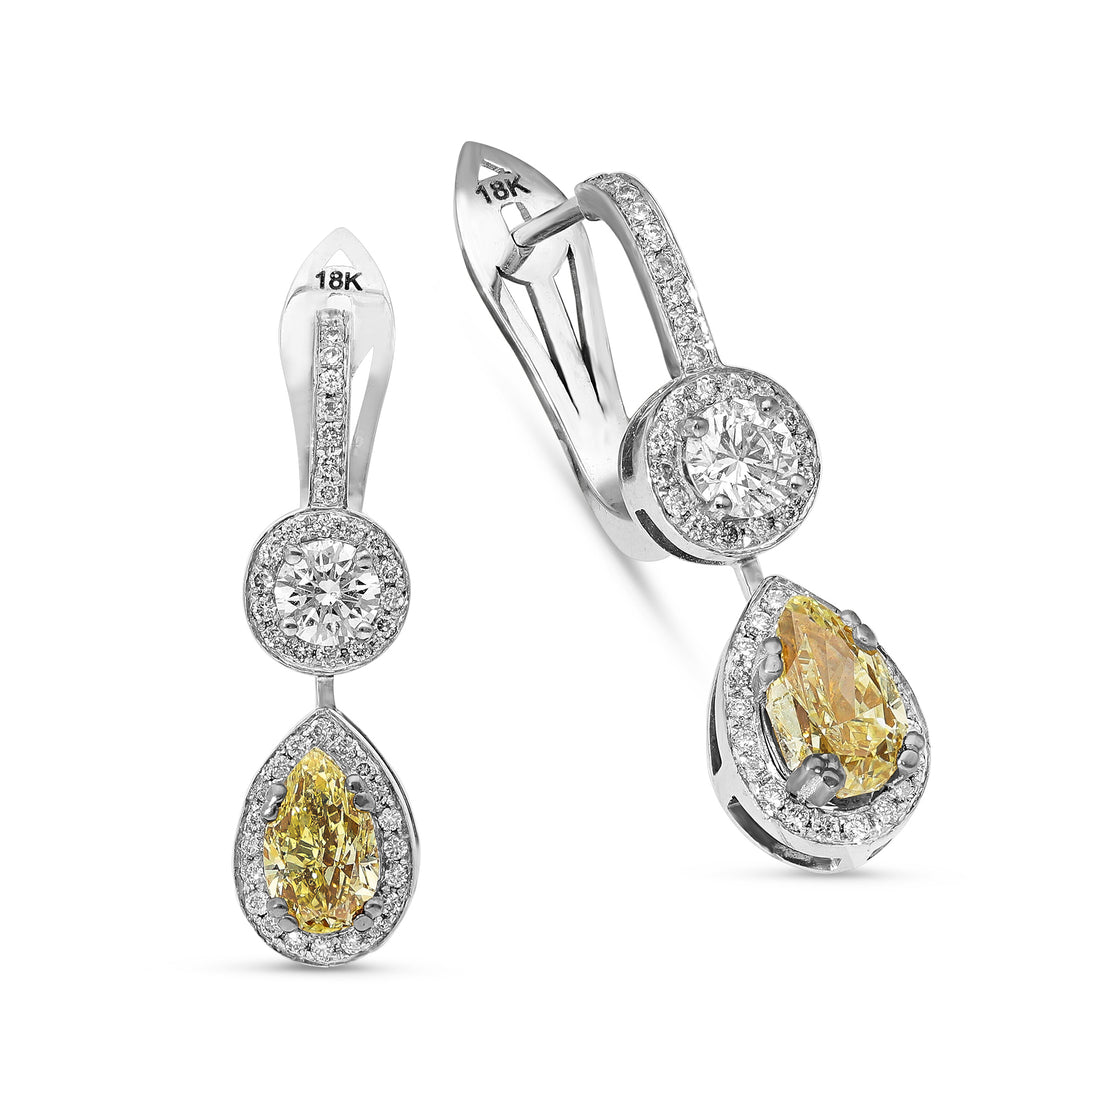 Canary Yellow and Diamond Double Drop Earrings - 2.3 Carat